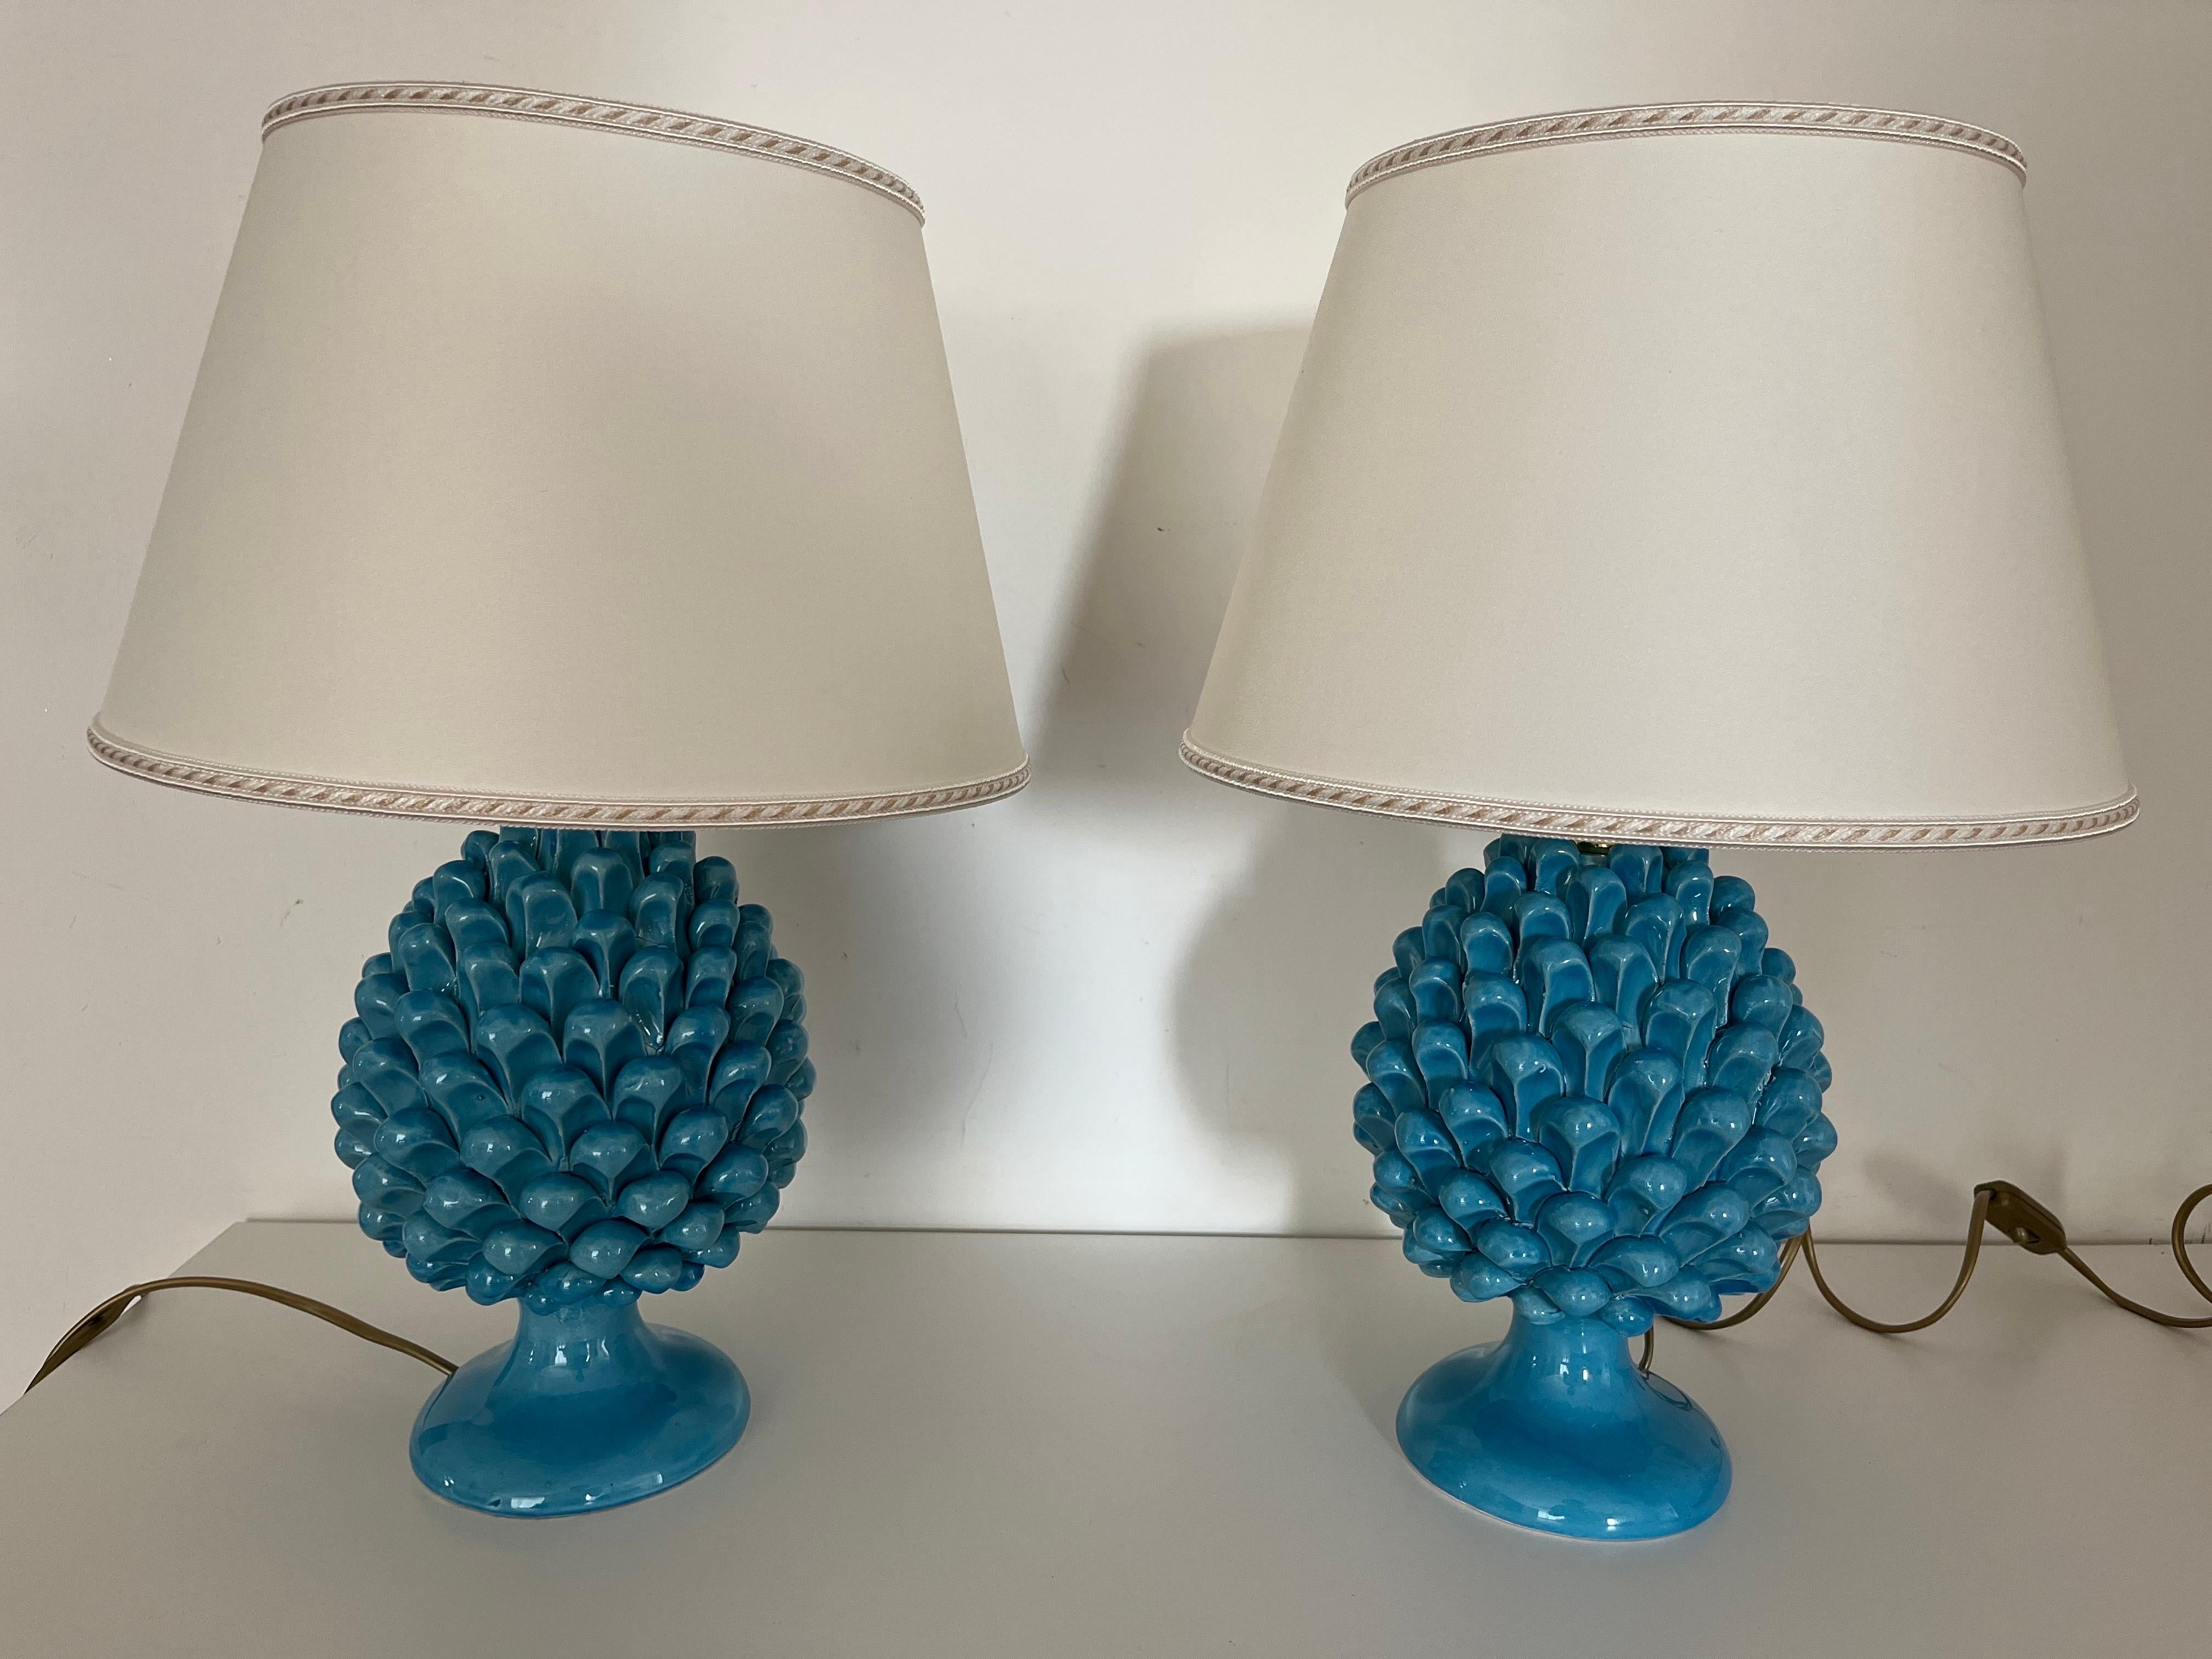 Contemporary Caltagirone Ceramics a Pair of Blu Table Lamps only for today 